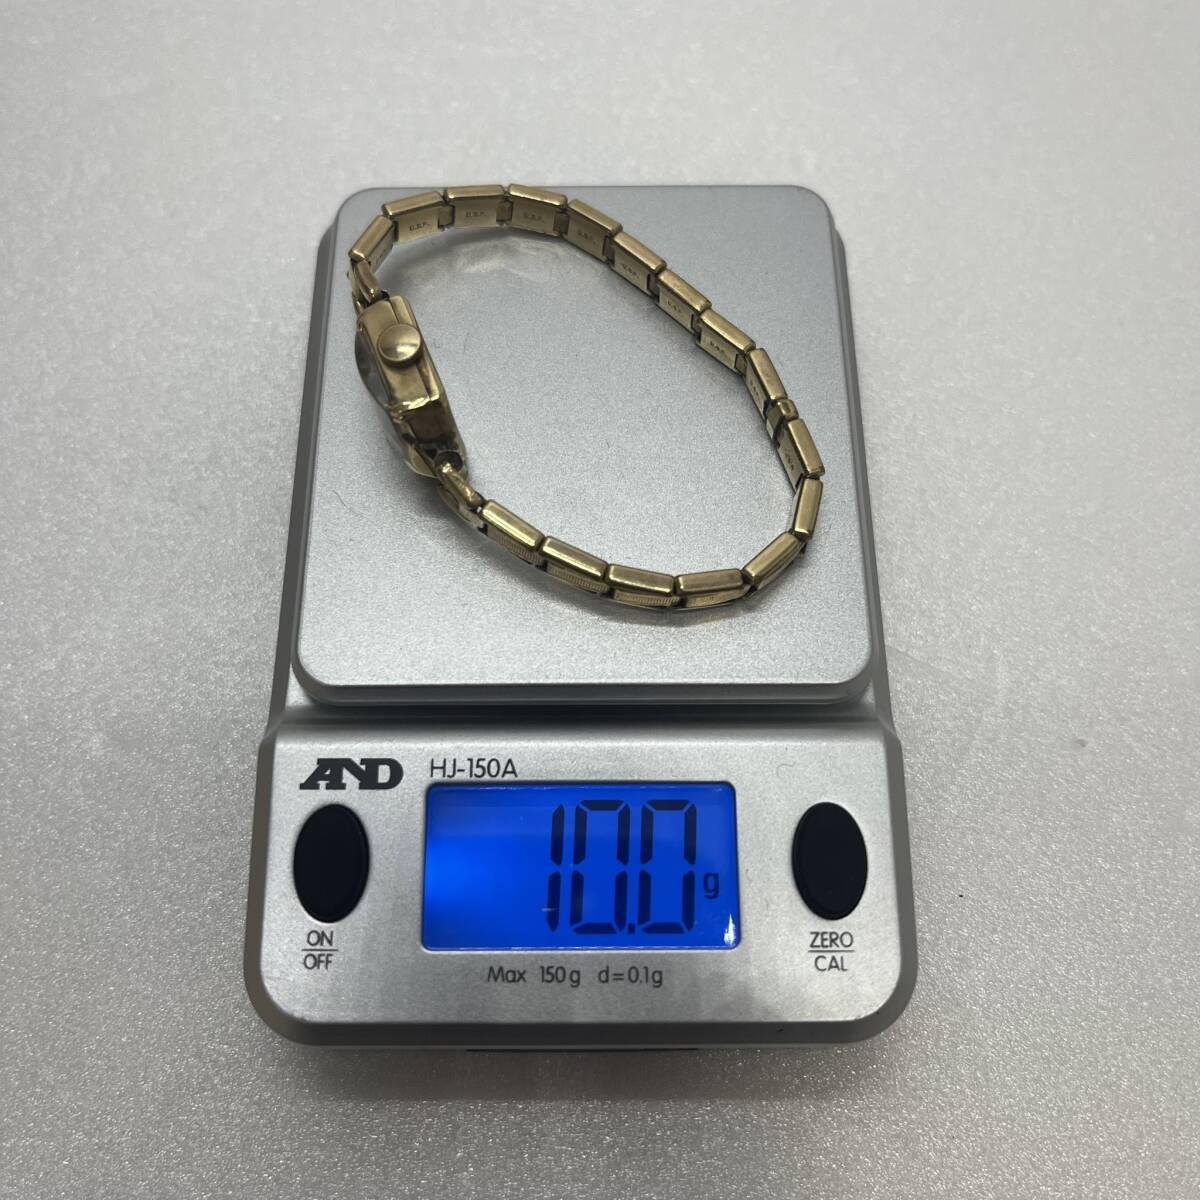 [DHS2715ST]TITUS Thai tas17JEWELS 14KT hand winding lady's wristwatch 17 stone 14 gold gold clock gross weight approximately 10.0g * operation not yet verification 